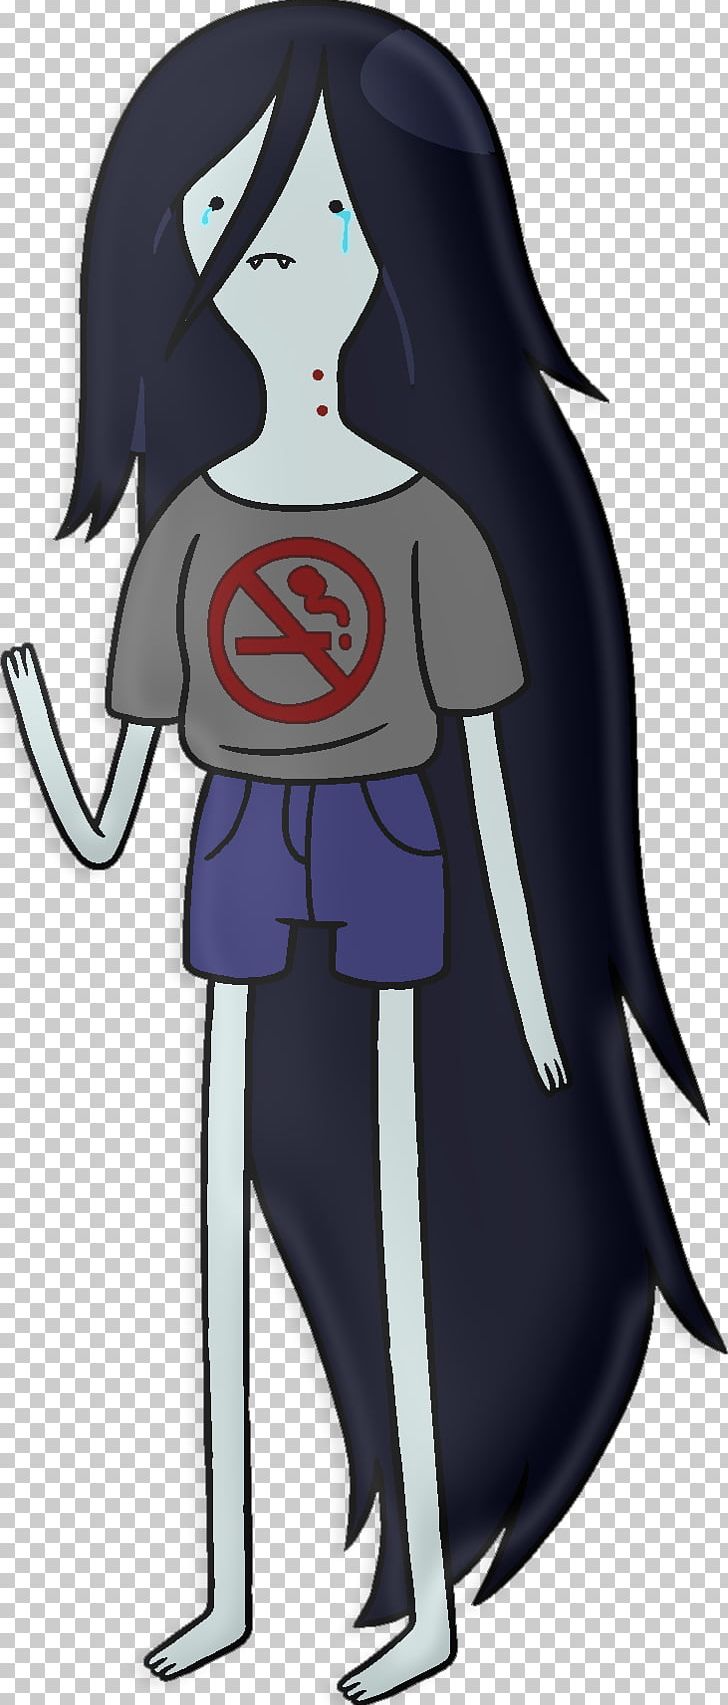 Marceline The Vampire Queen Ice King Finn The Human Princess Bubblegum Jake The Dog PNG, Clipart,  Free PNG Download